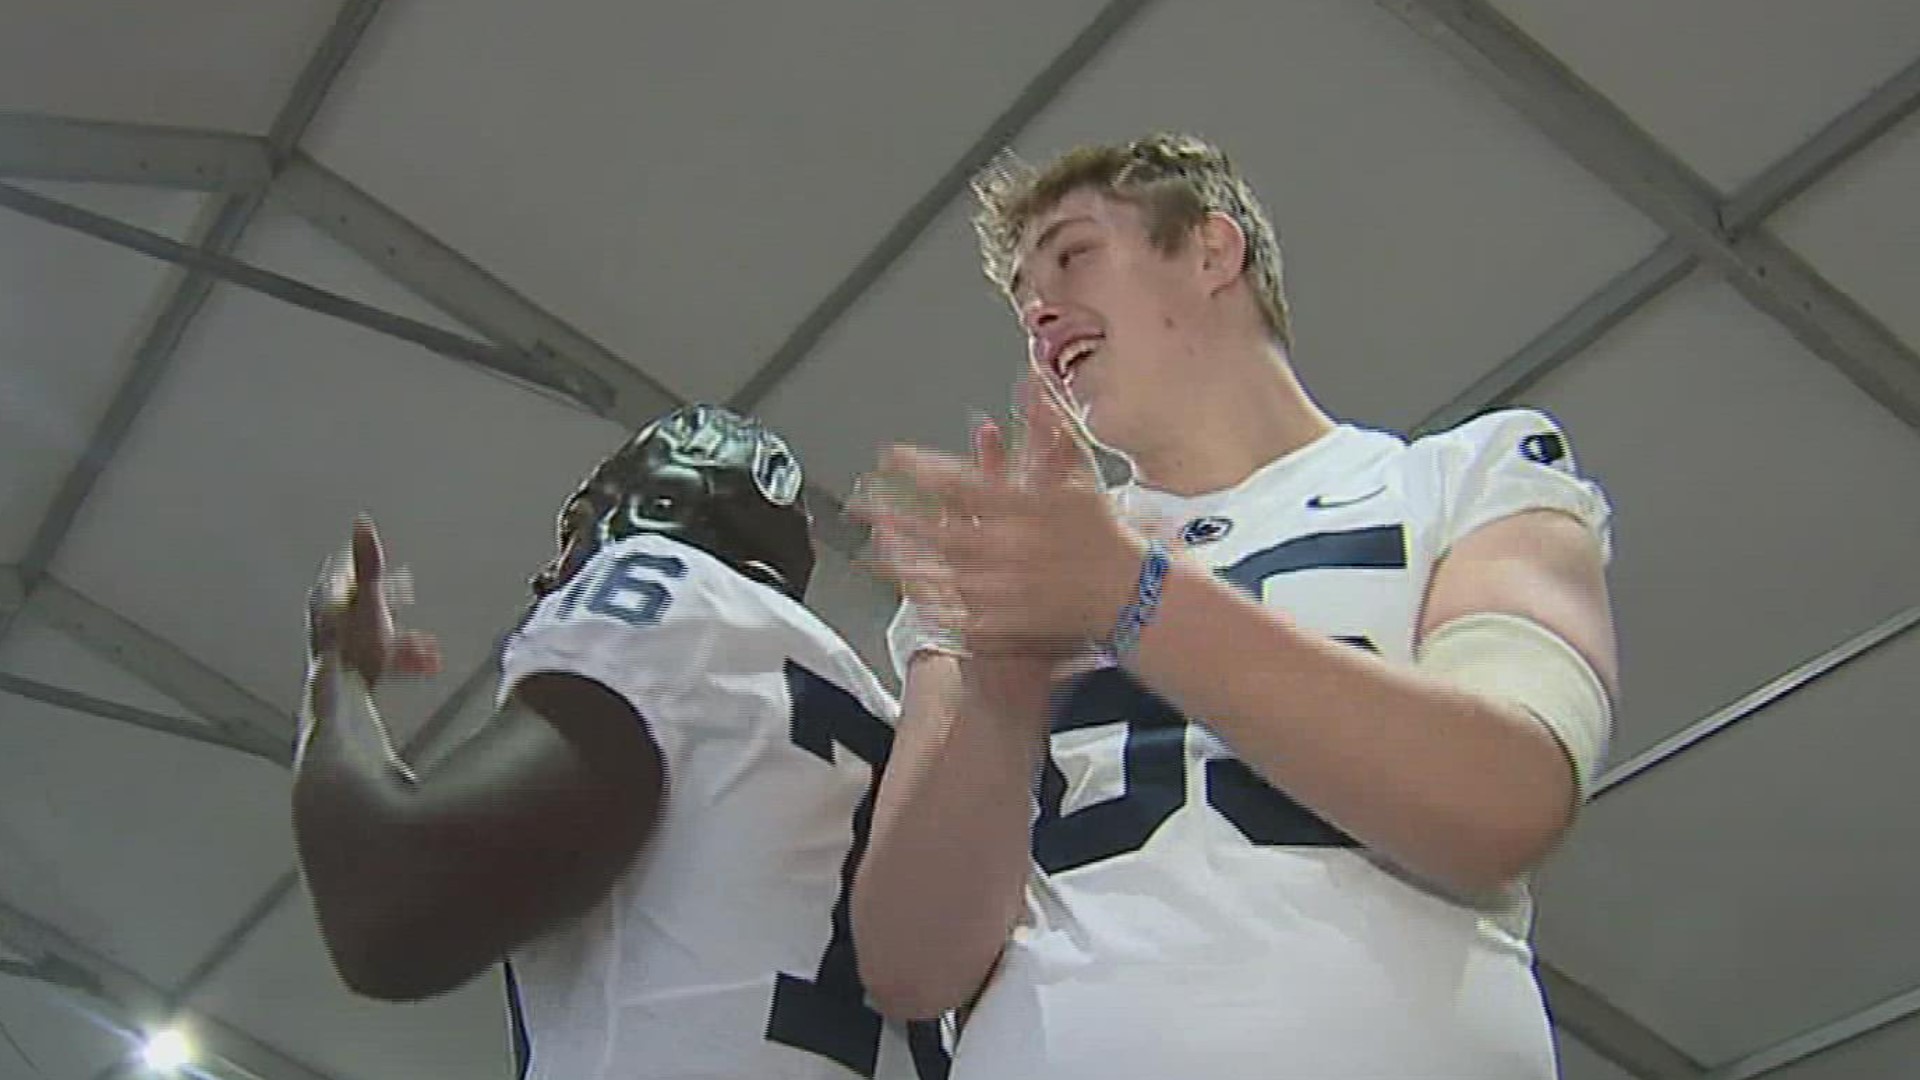 Penn State enjoys a day of fun, laughter and reminiscing with teammates before the big game